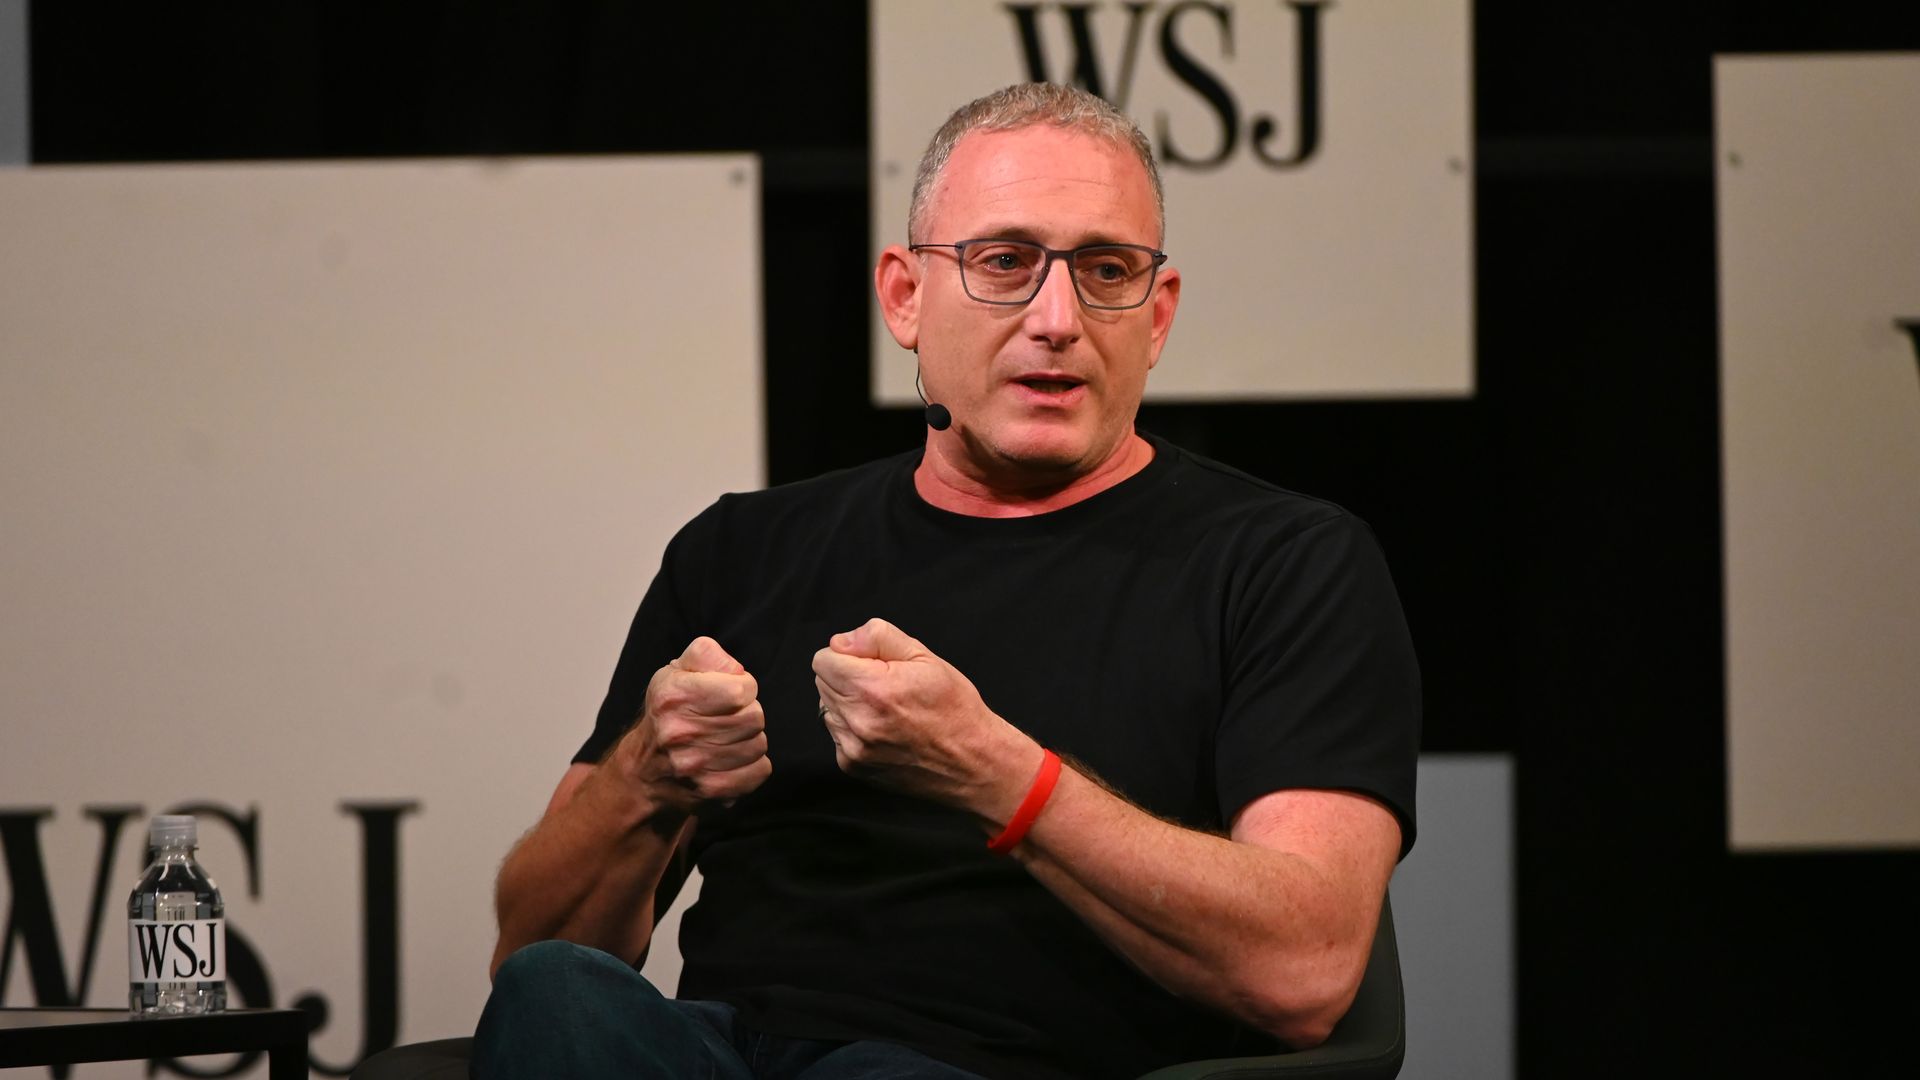 Post News founder and ex-Waze CEO Noam Bardin at a 2019 WSJ conference.